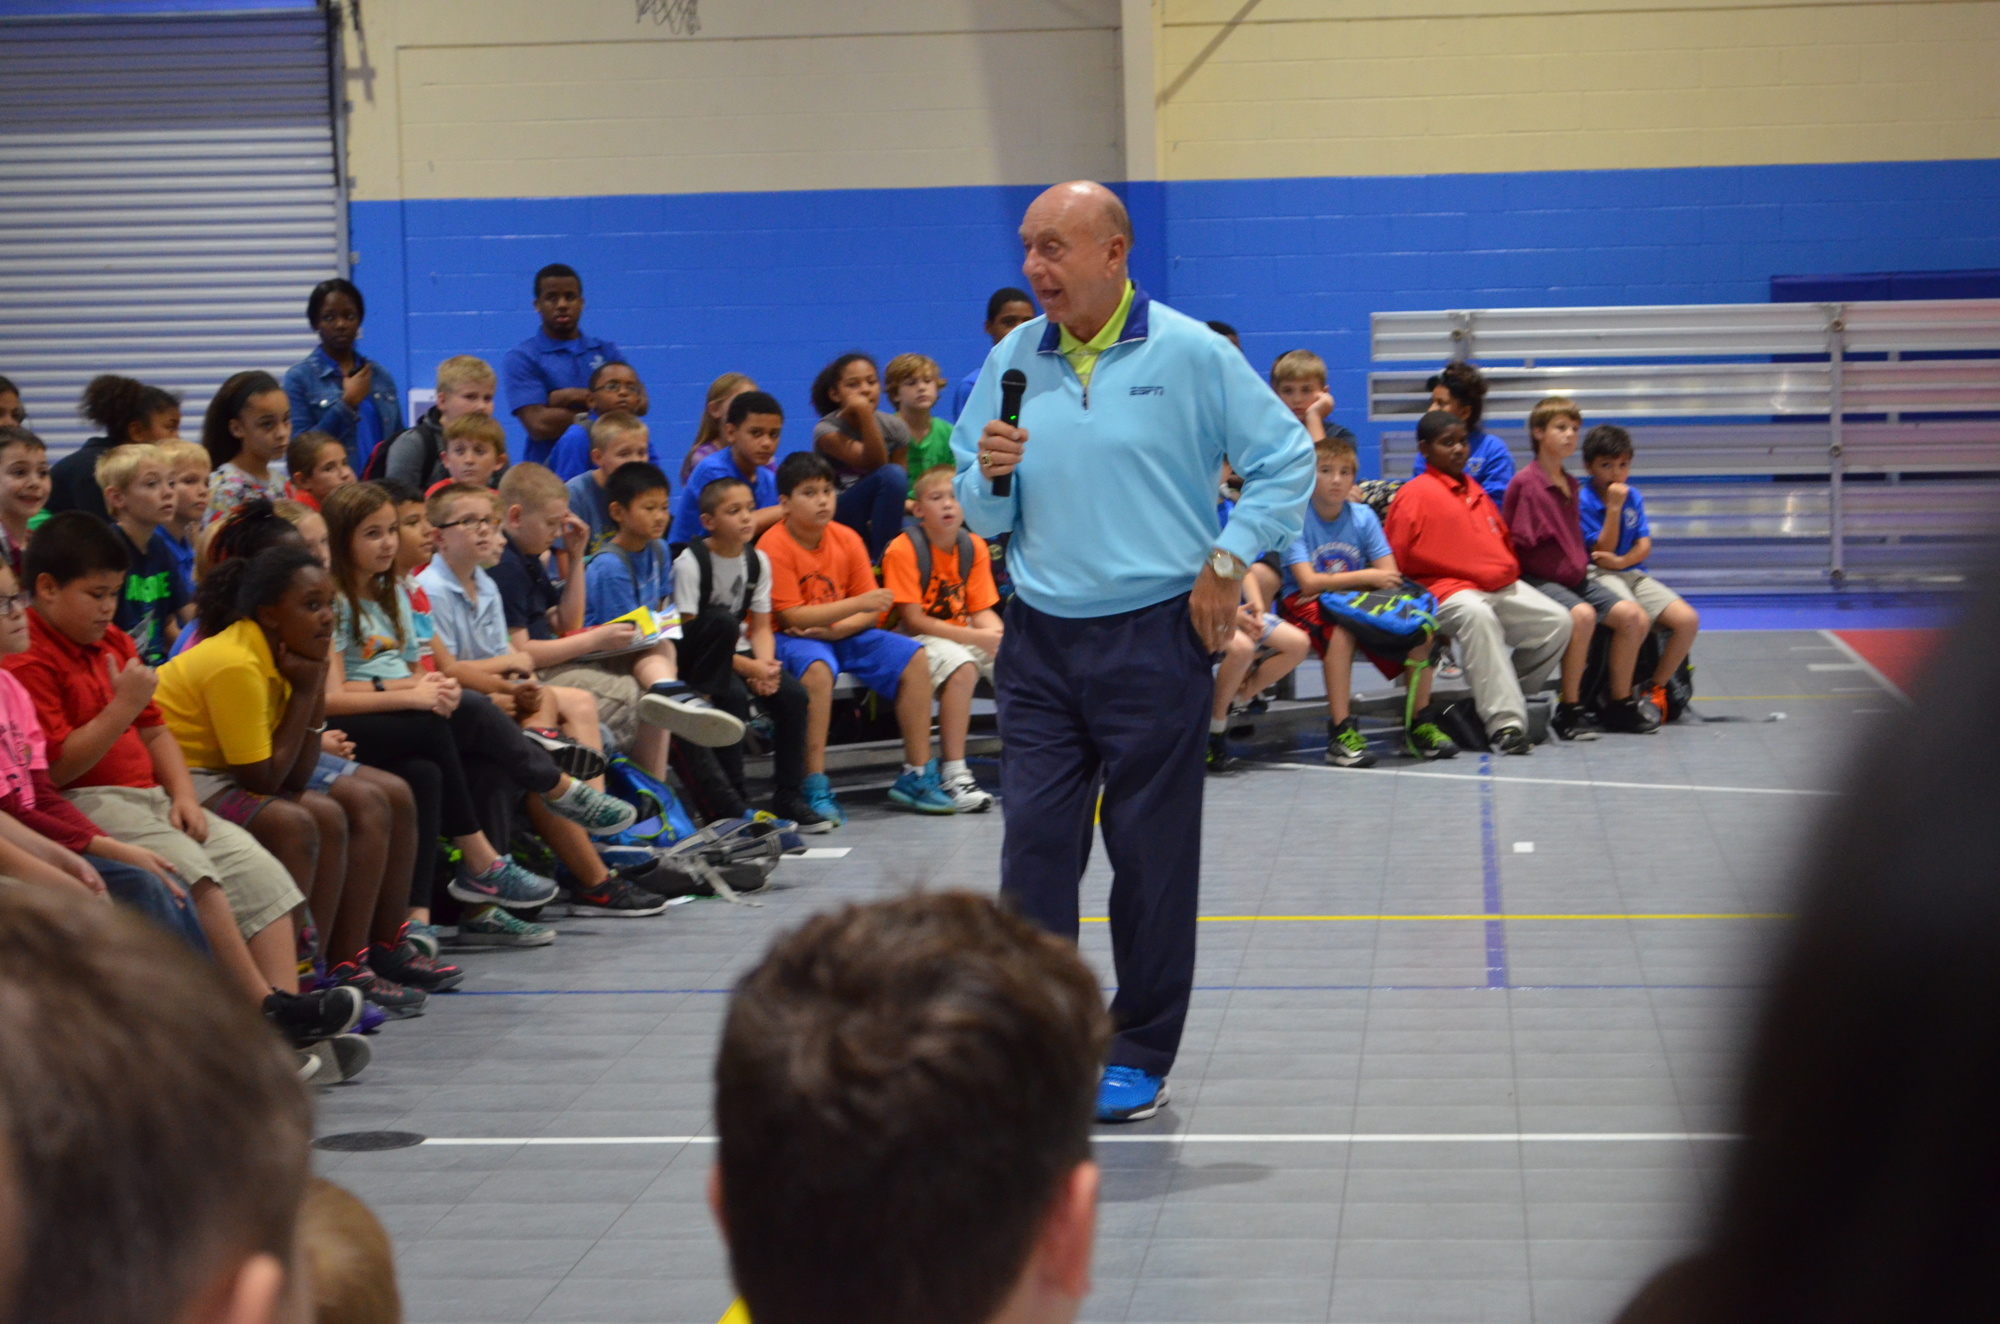 Dick Vitale took the opportunity to inspire students.